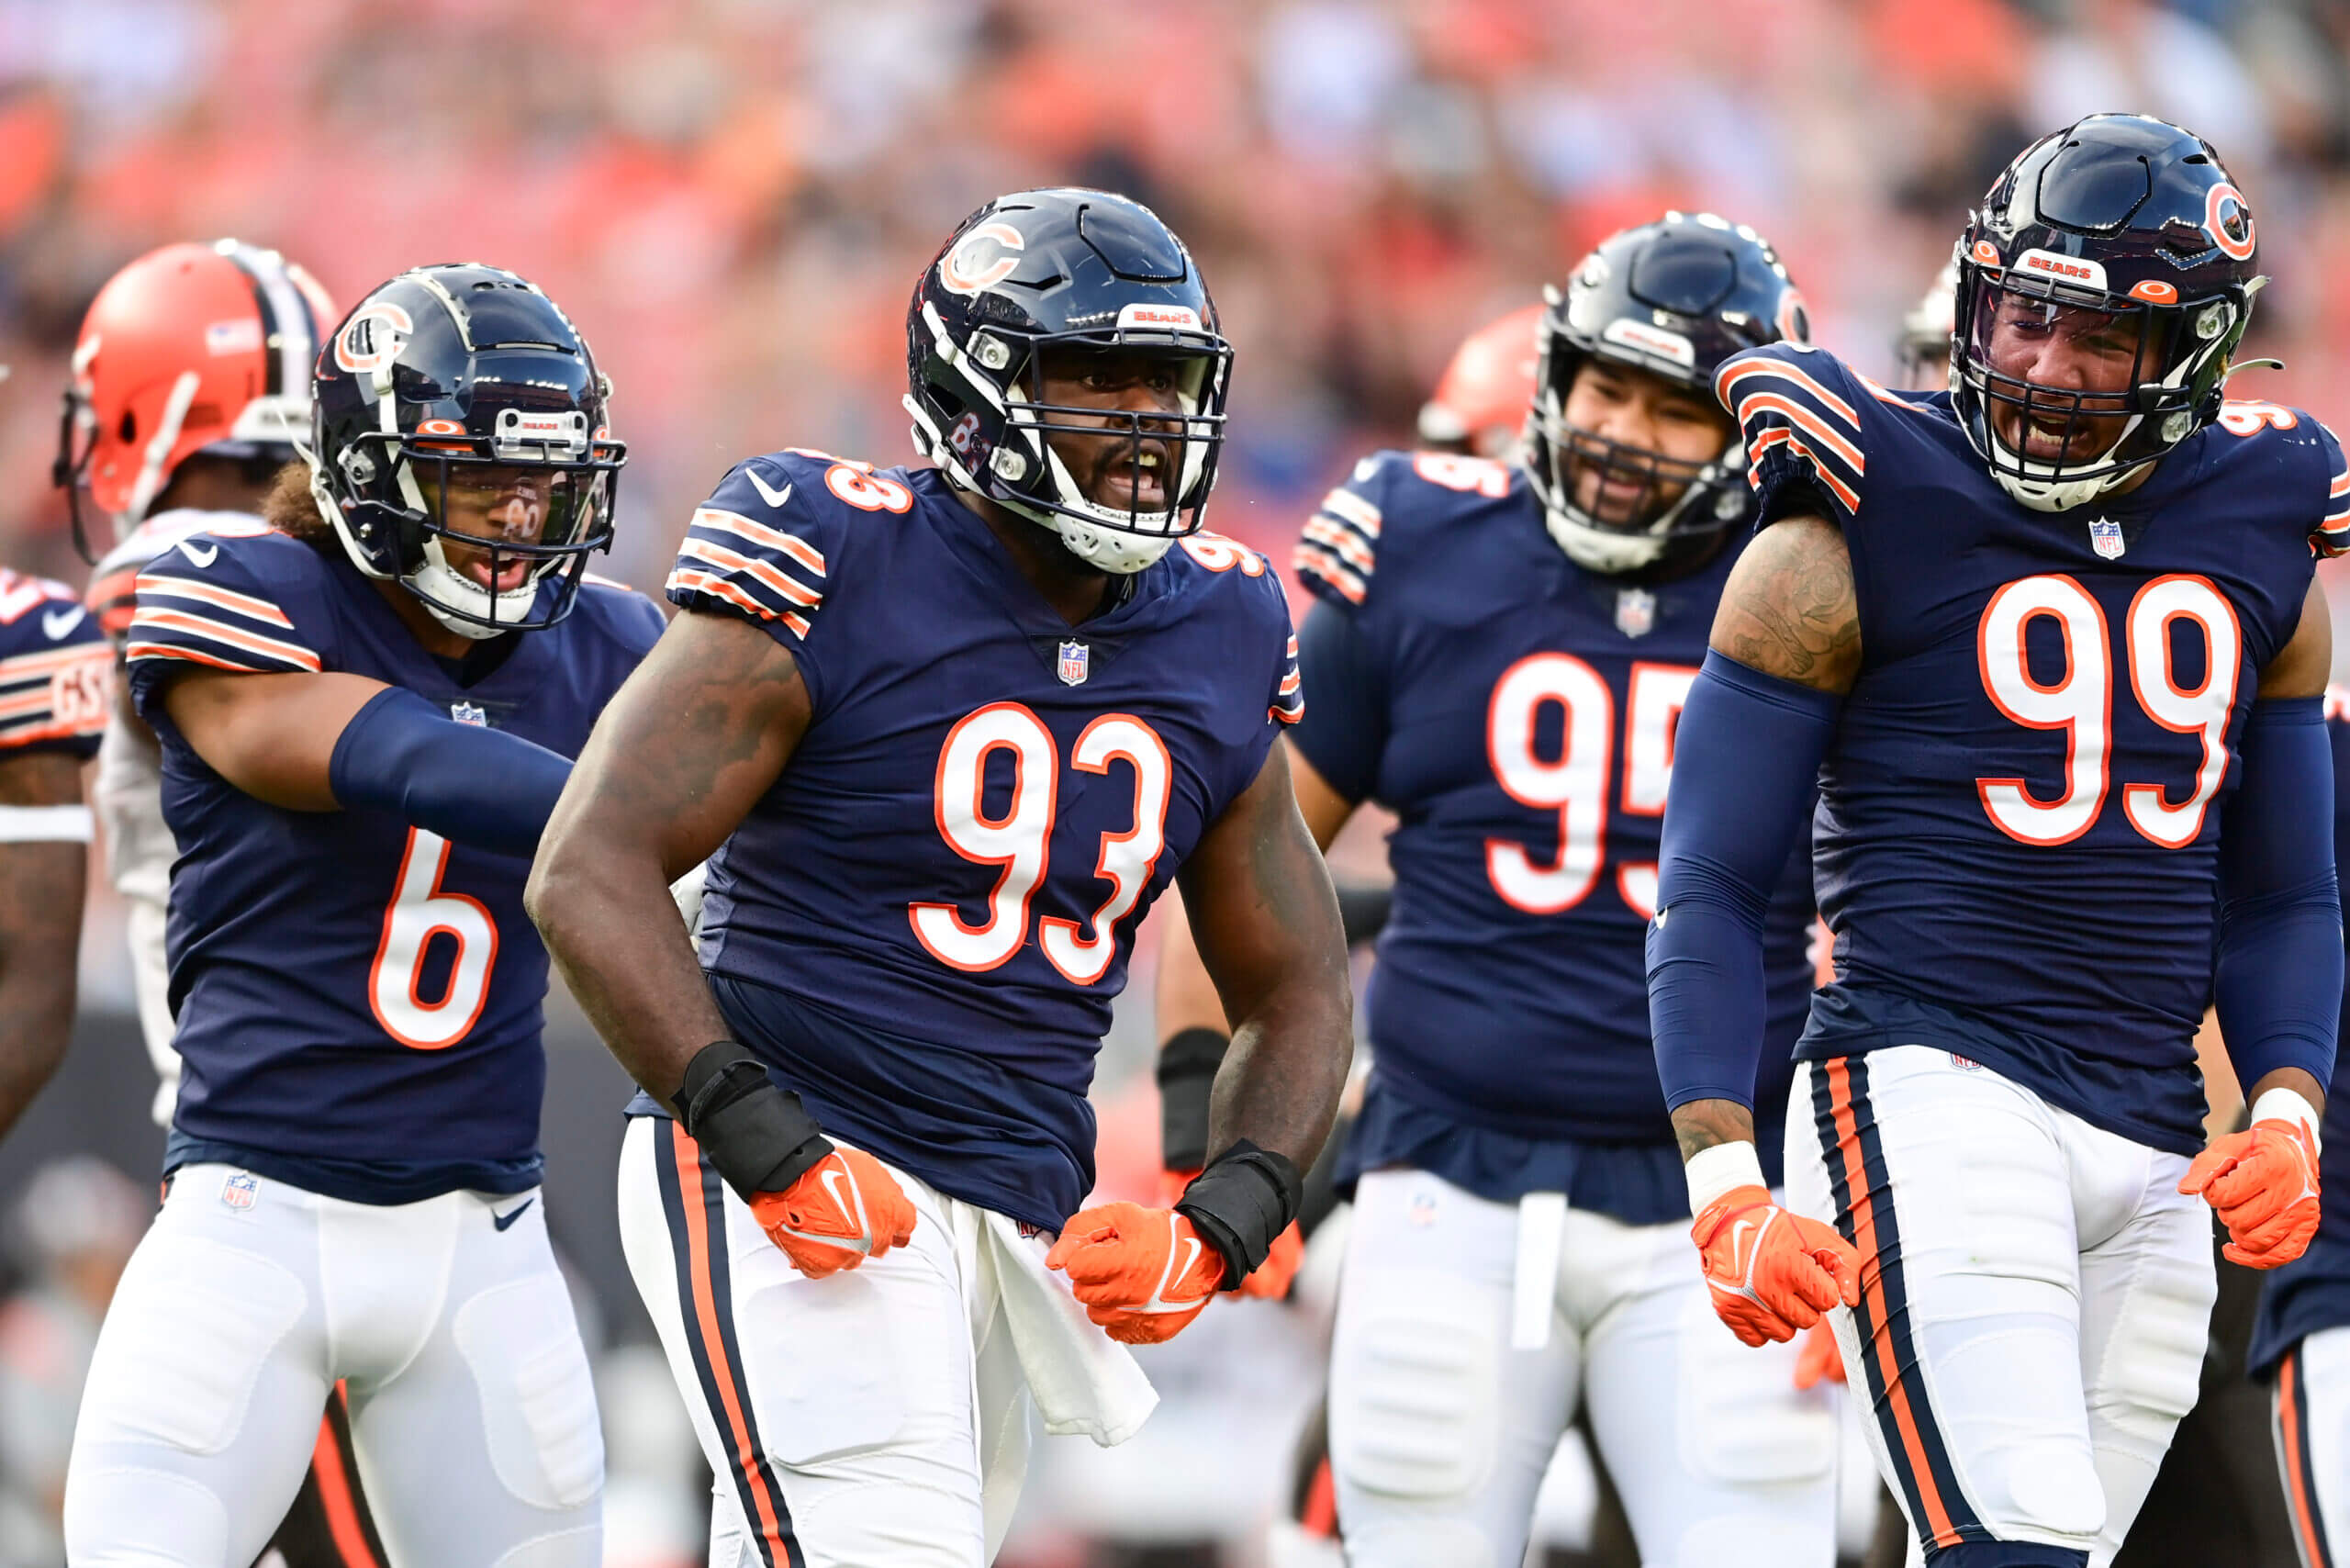  Could the Chicago Bears Shake Up the NFL Draft? Inside the Rumored Big Trade With Minnesota Vikings